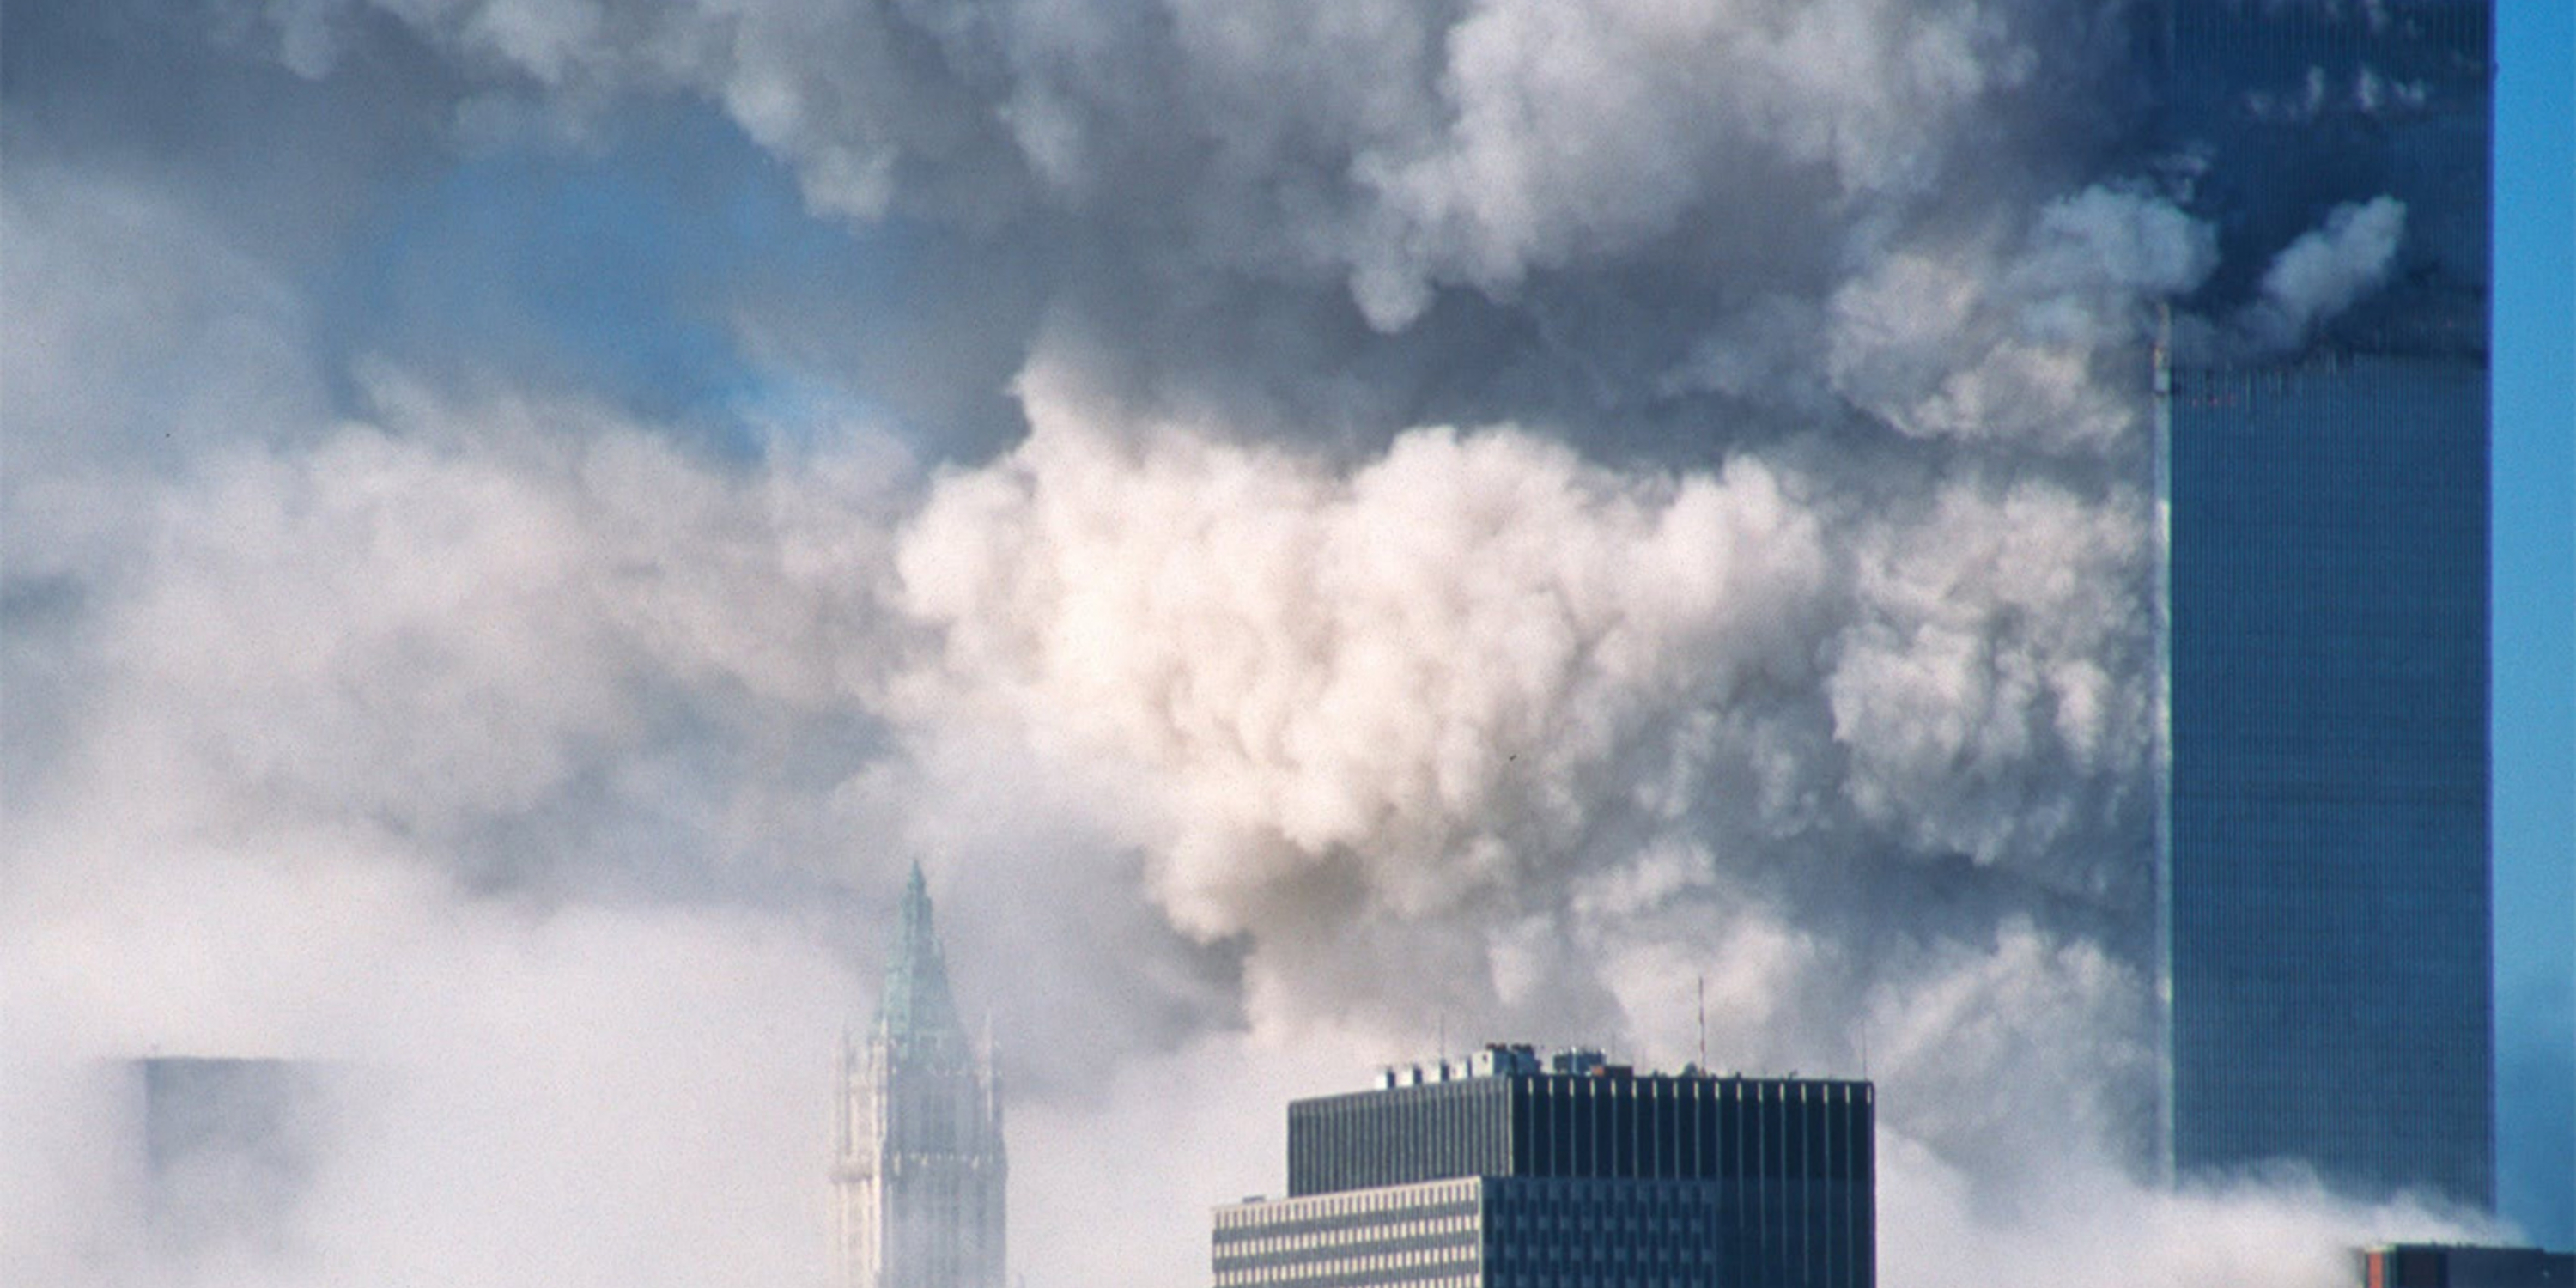 The World Trade Center towers on September 11, 2001